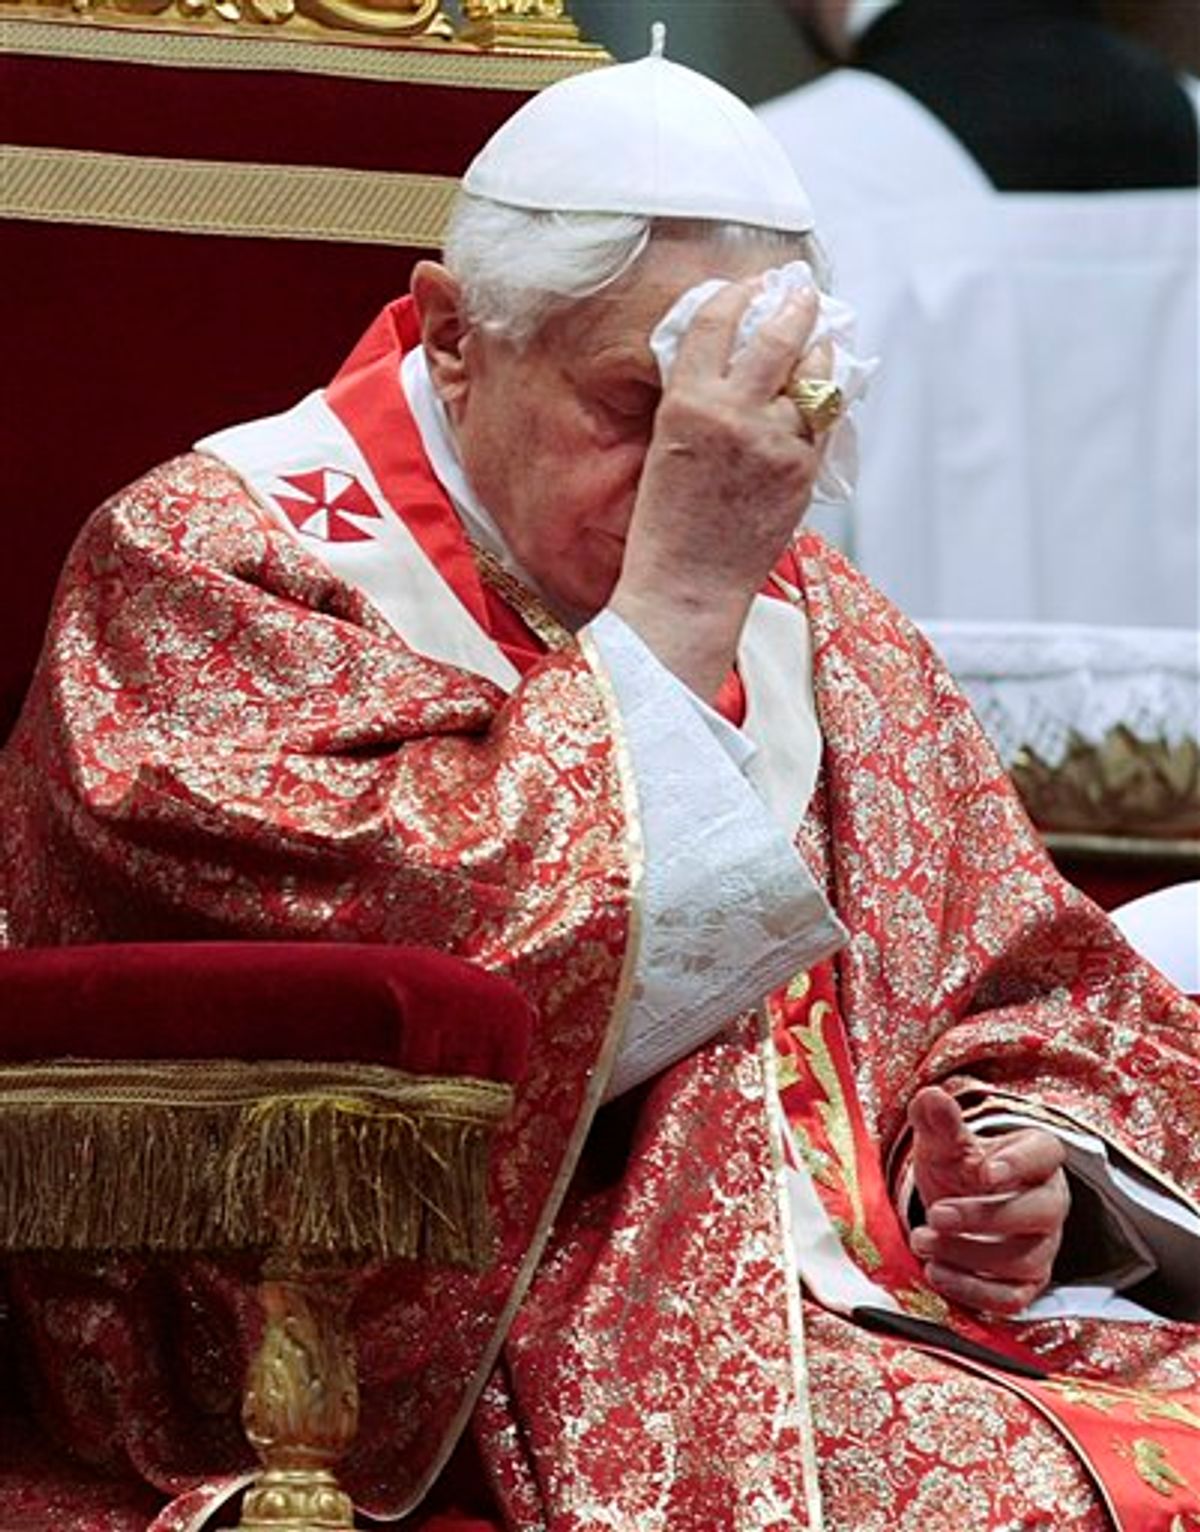 Pope Benedict XVI wipes his forehead as he celebrates a Pentecost Mass inside St. Peter's Basilica, at the Vatican, Sunday, May 23, 2010. (AP Photo/Gregorio Borgia) (AP)